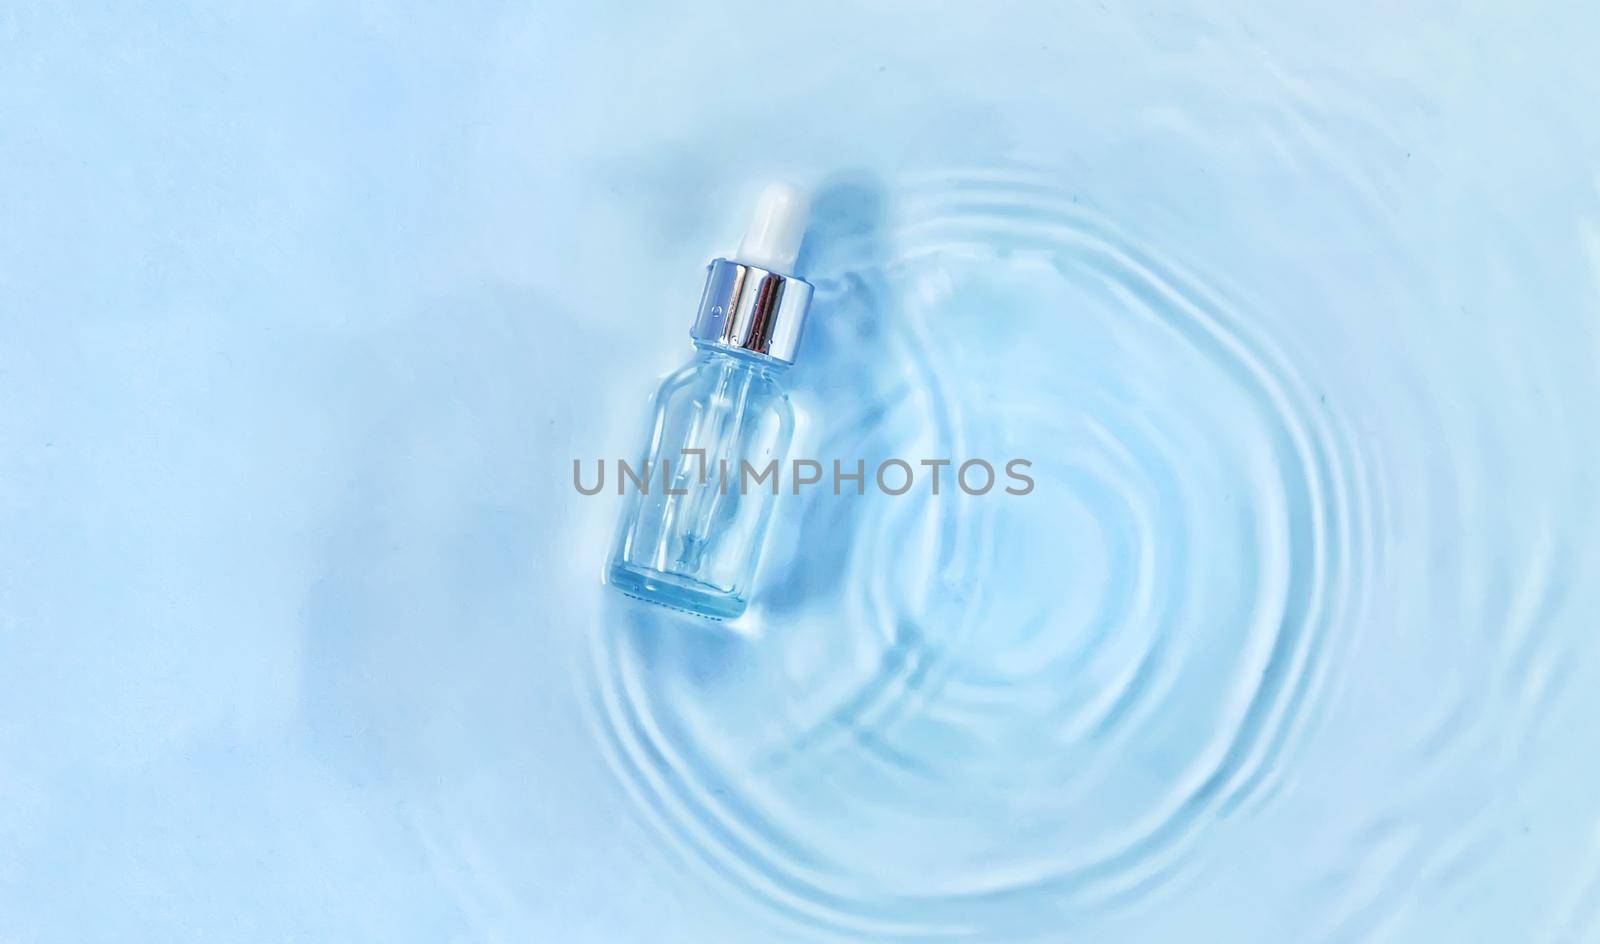 Cosmetics in a bottle in water, skin hydration concept. Hyaluronic acid. Selective focus. Nature.